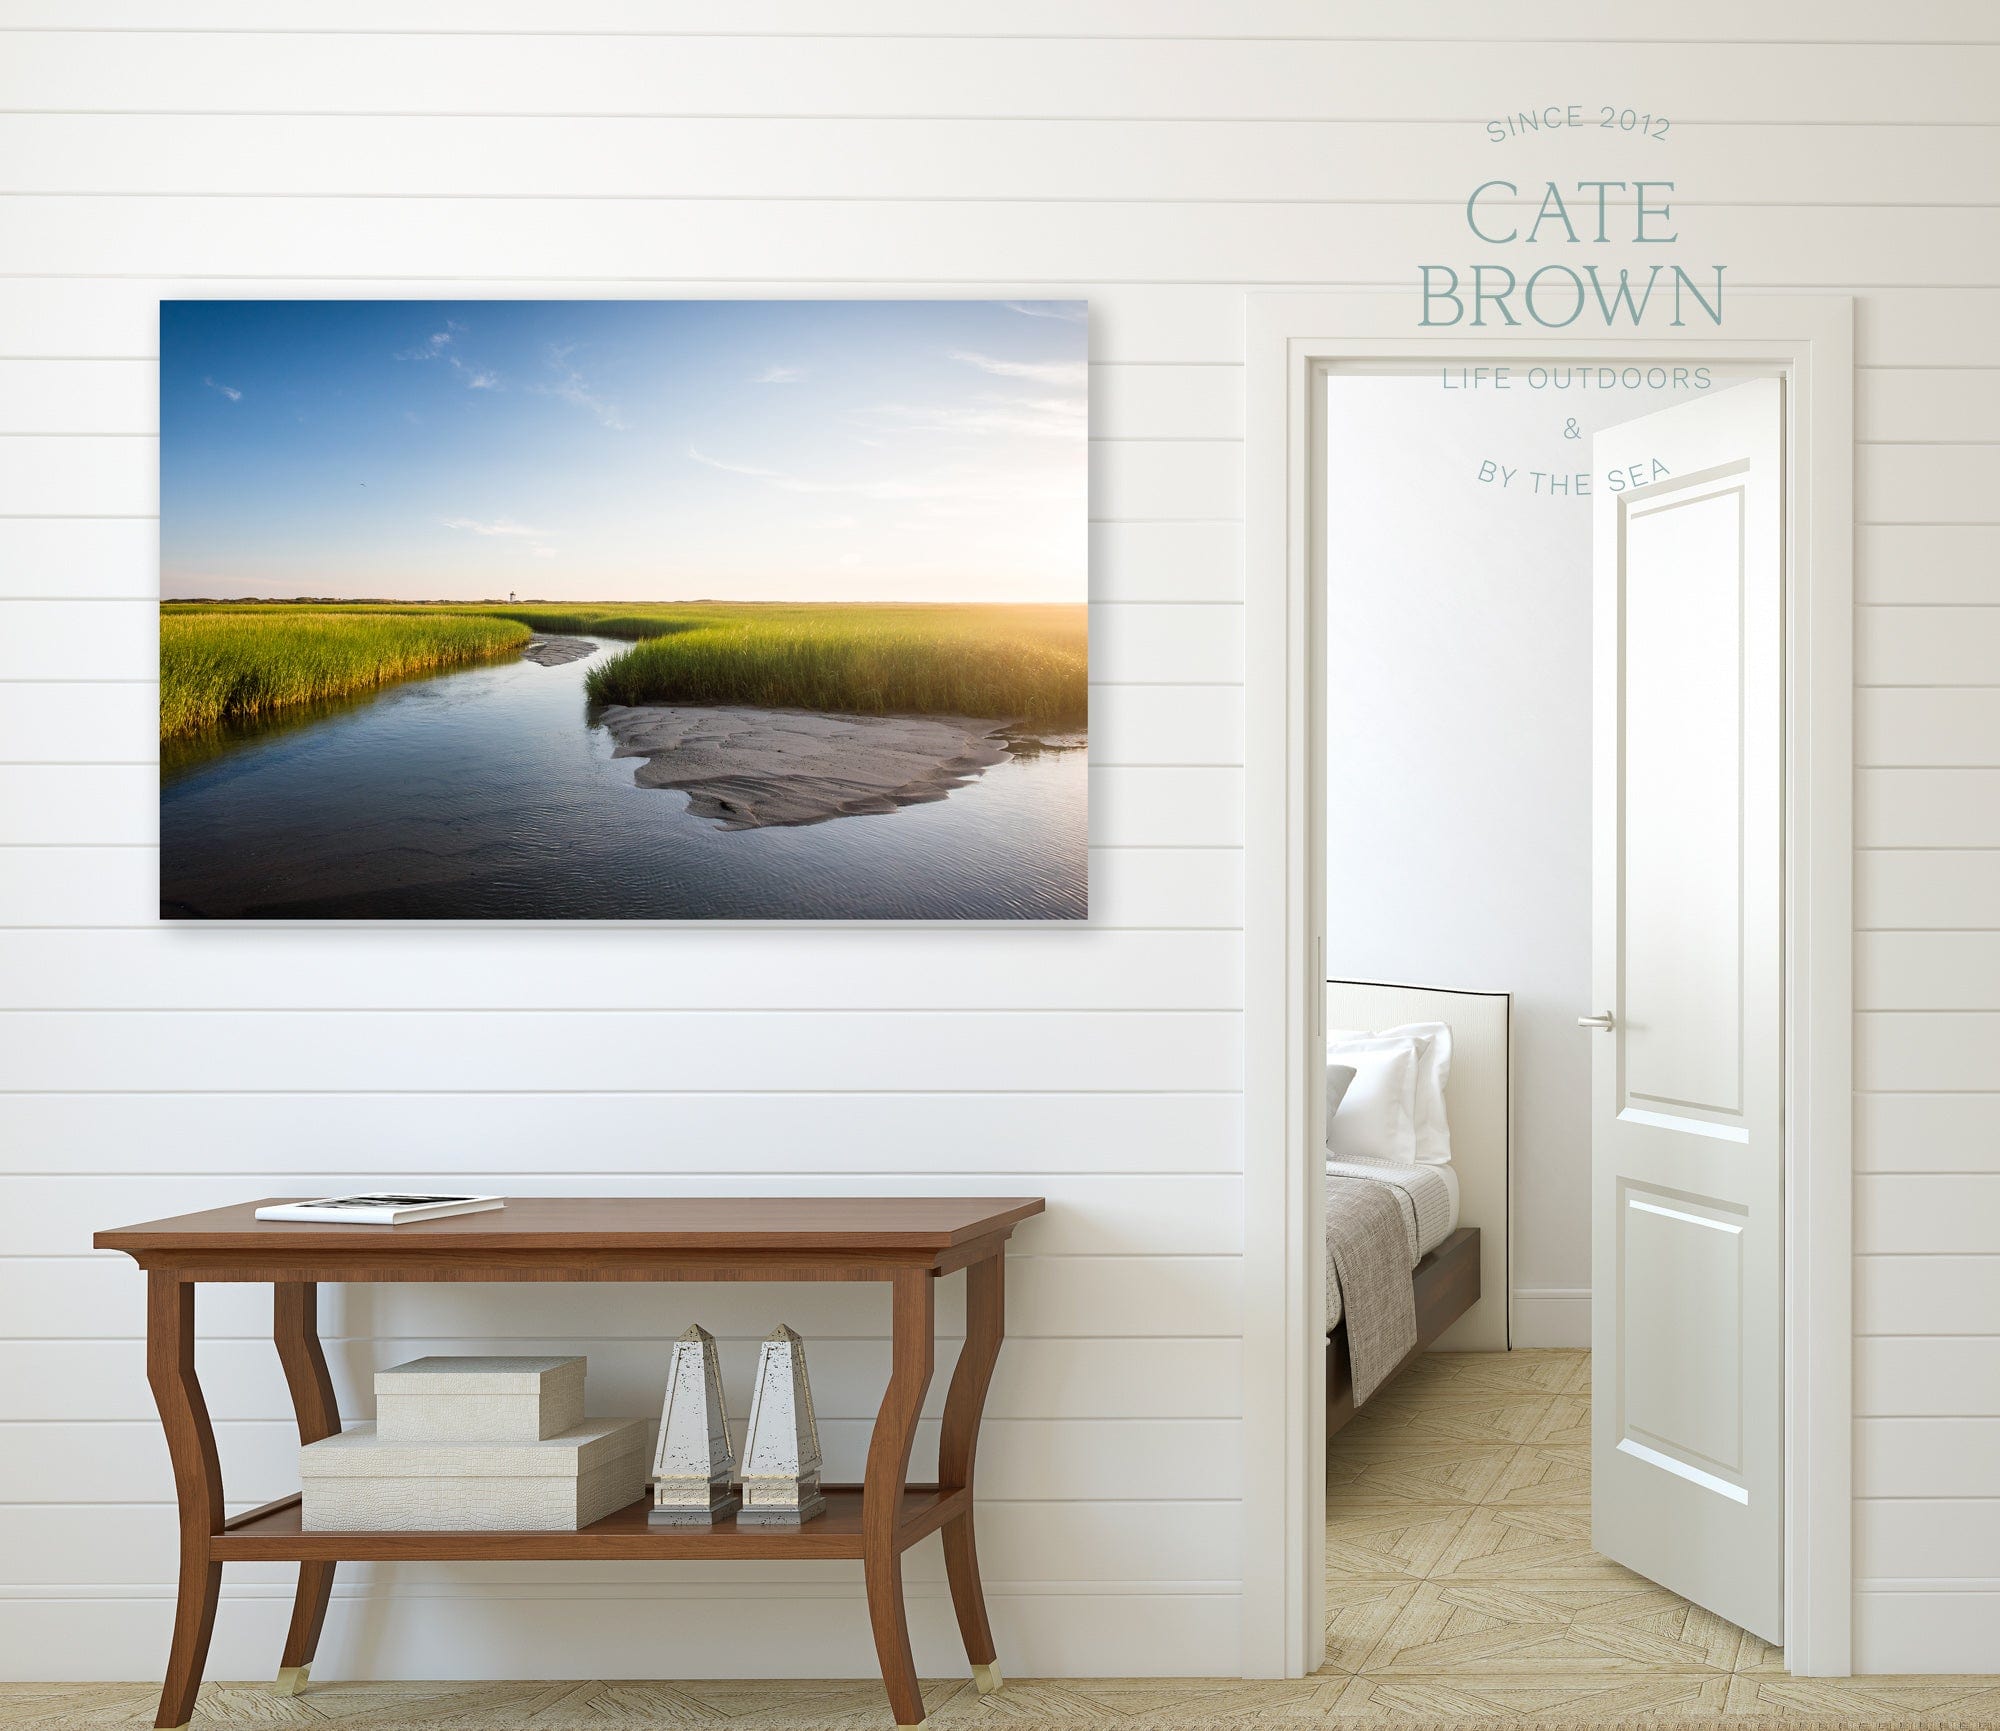 Cate Brown Photo Canvas / 16"x24" / None (Print Only) Wood End Light Across the Marsh  //  Landscape Photography Made to Order Ocean Fine Art